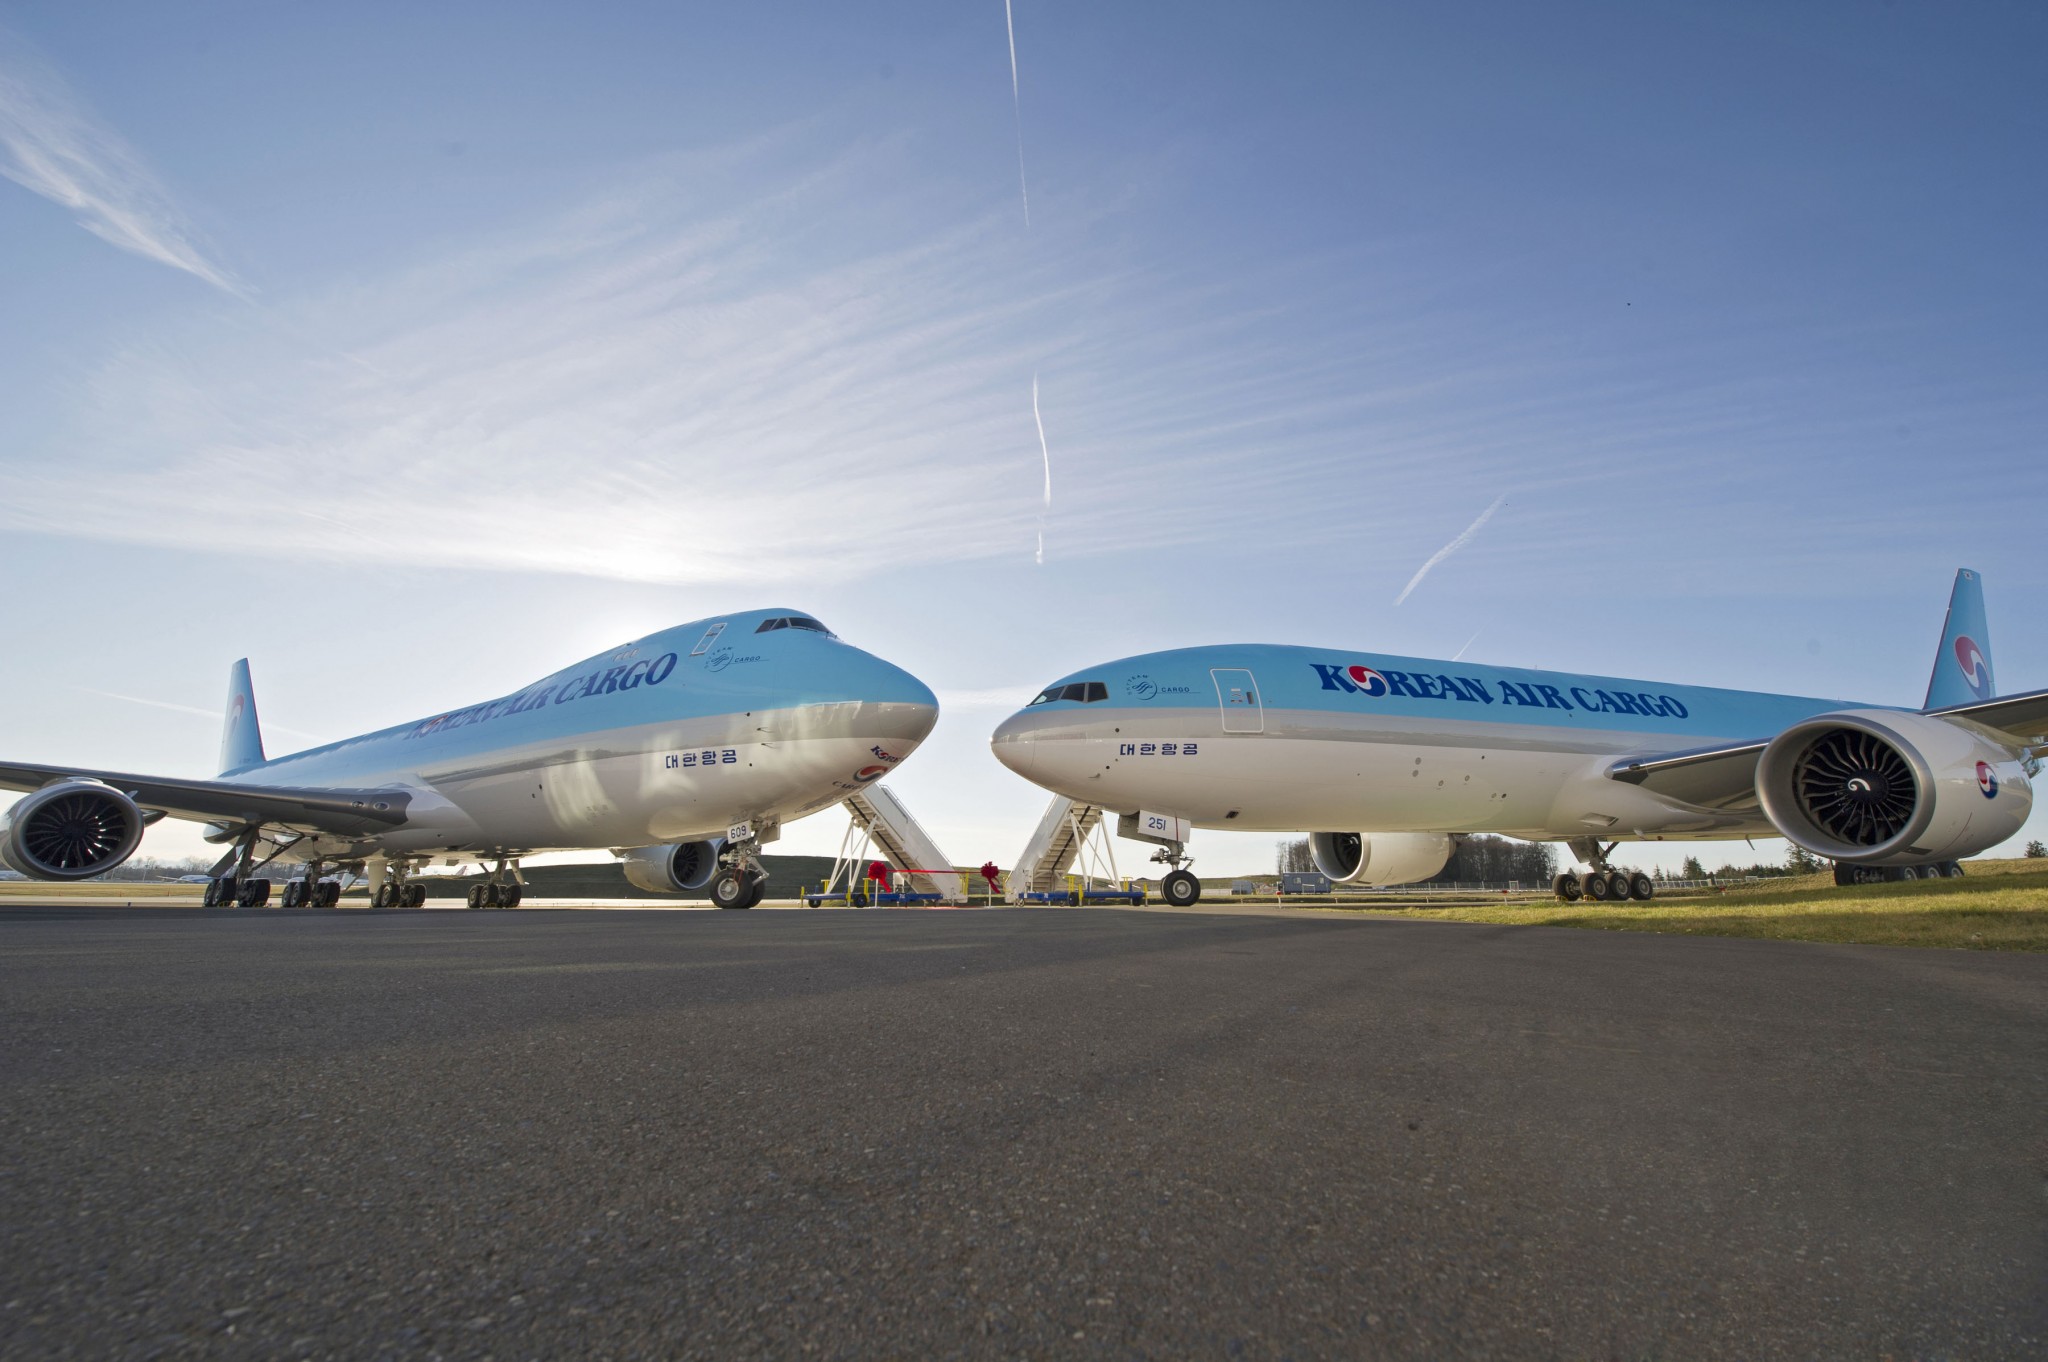 WestJet and Korean Air expand codeshare agreement